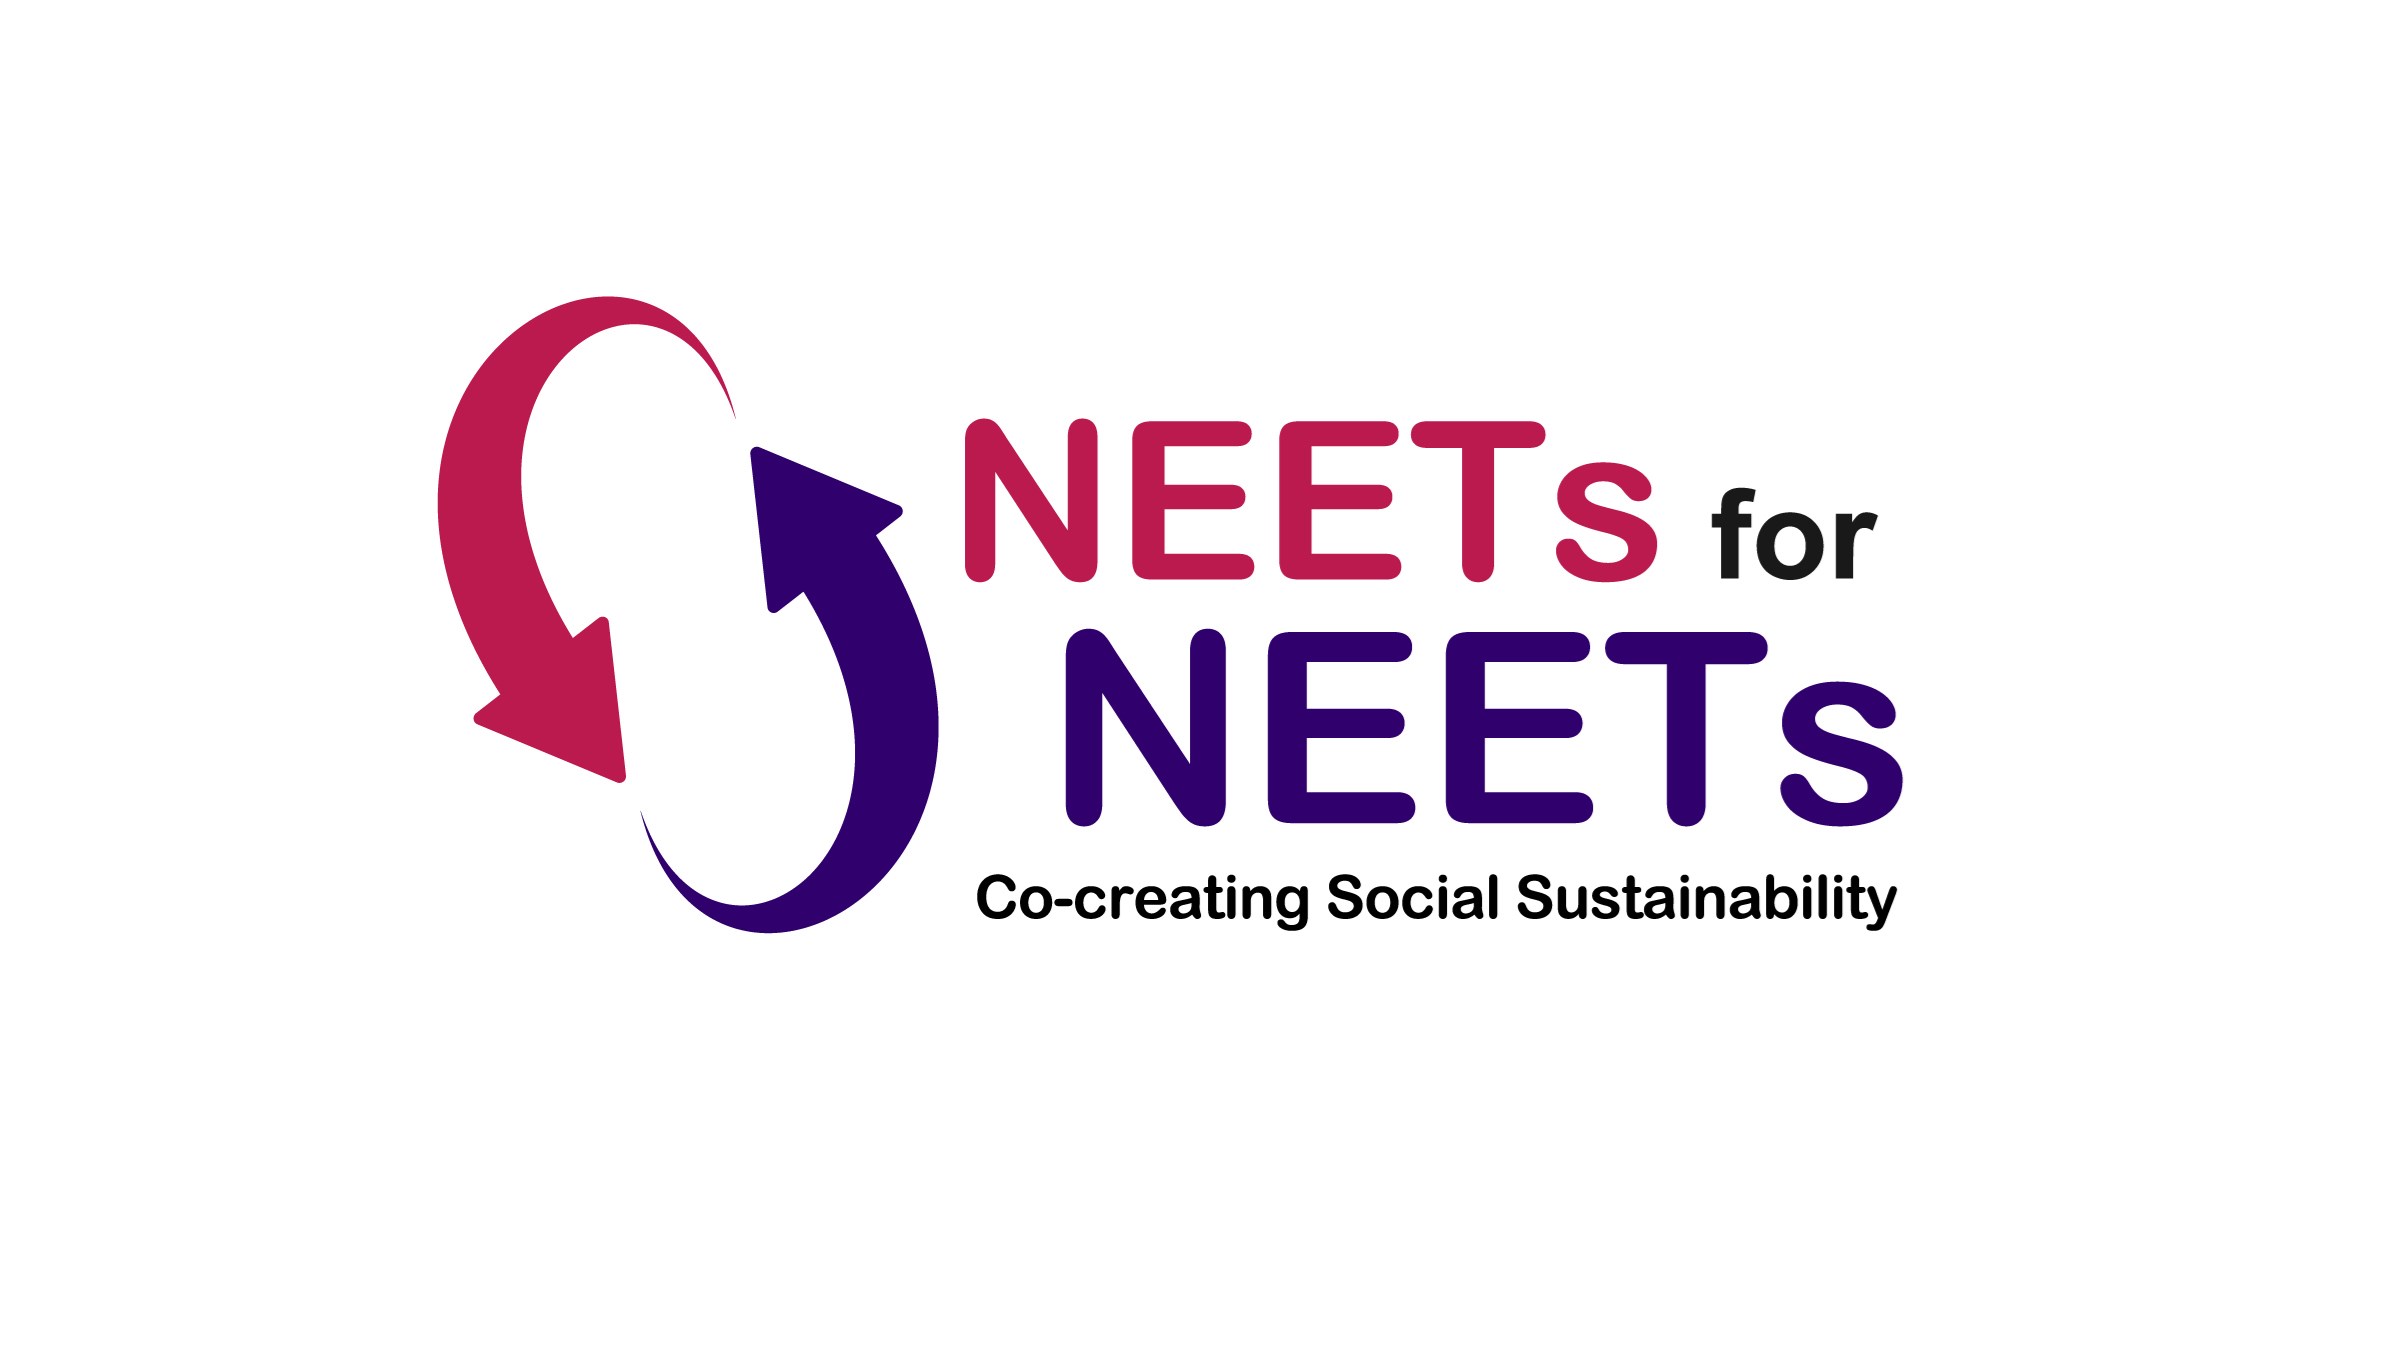 Logotype for NEETs for NEETs and the text Co-creating Social Sustainability